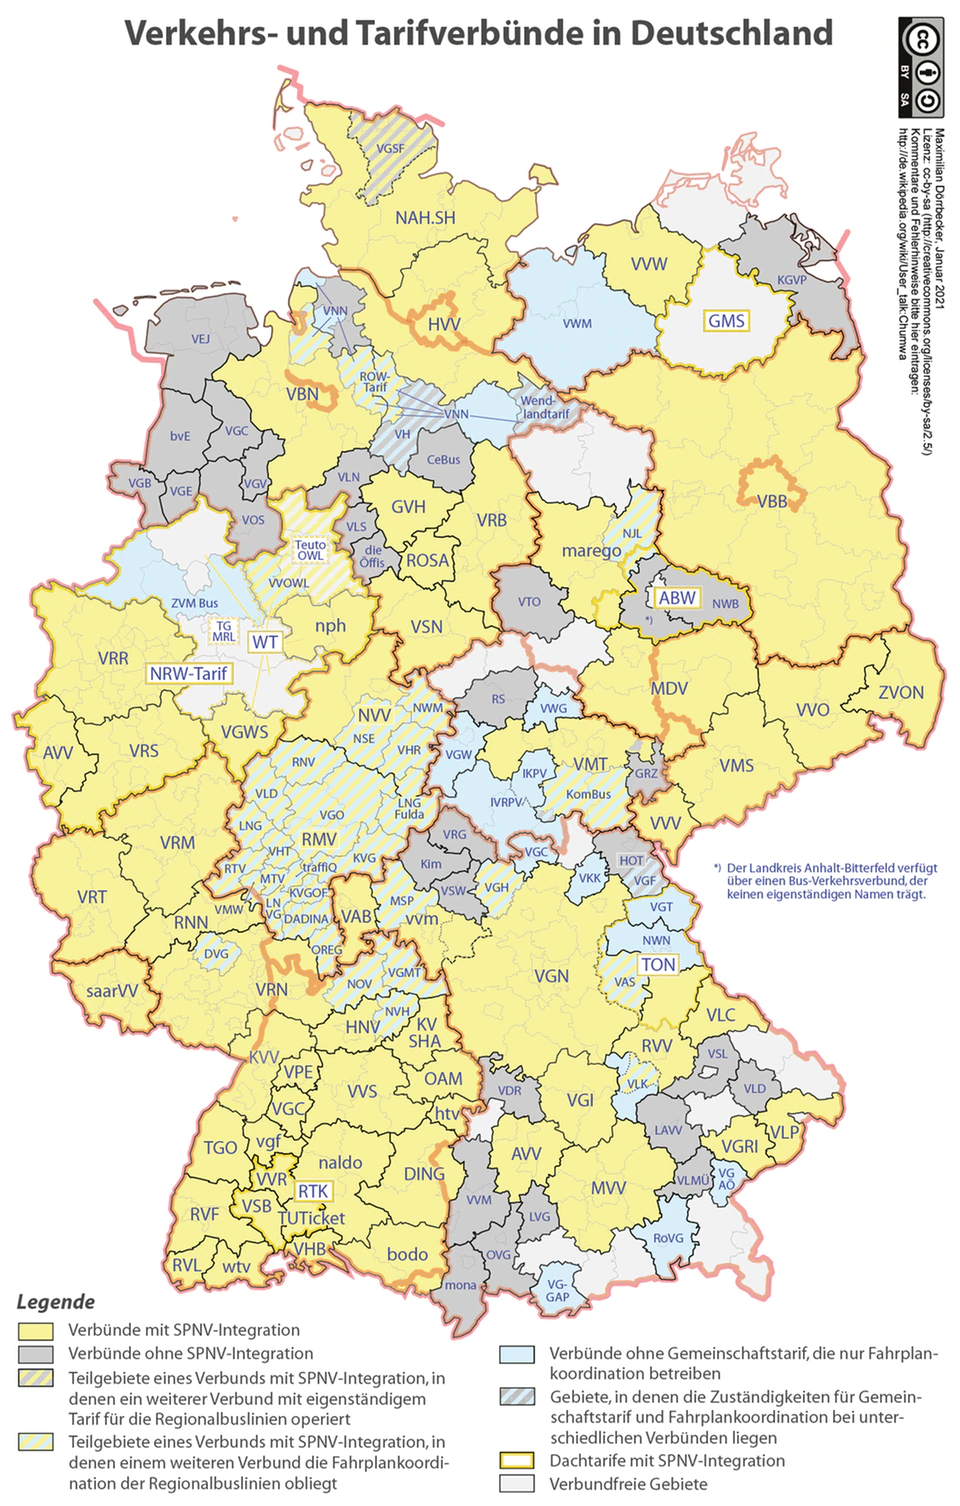 Transport and tariff associations in Germany